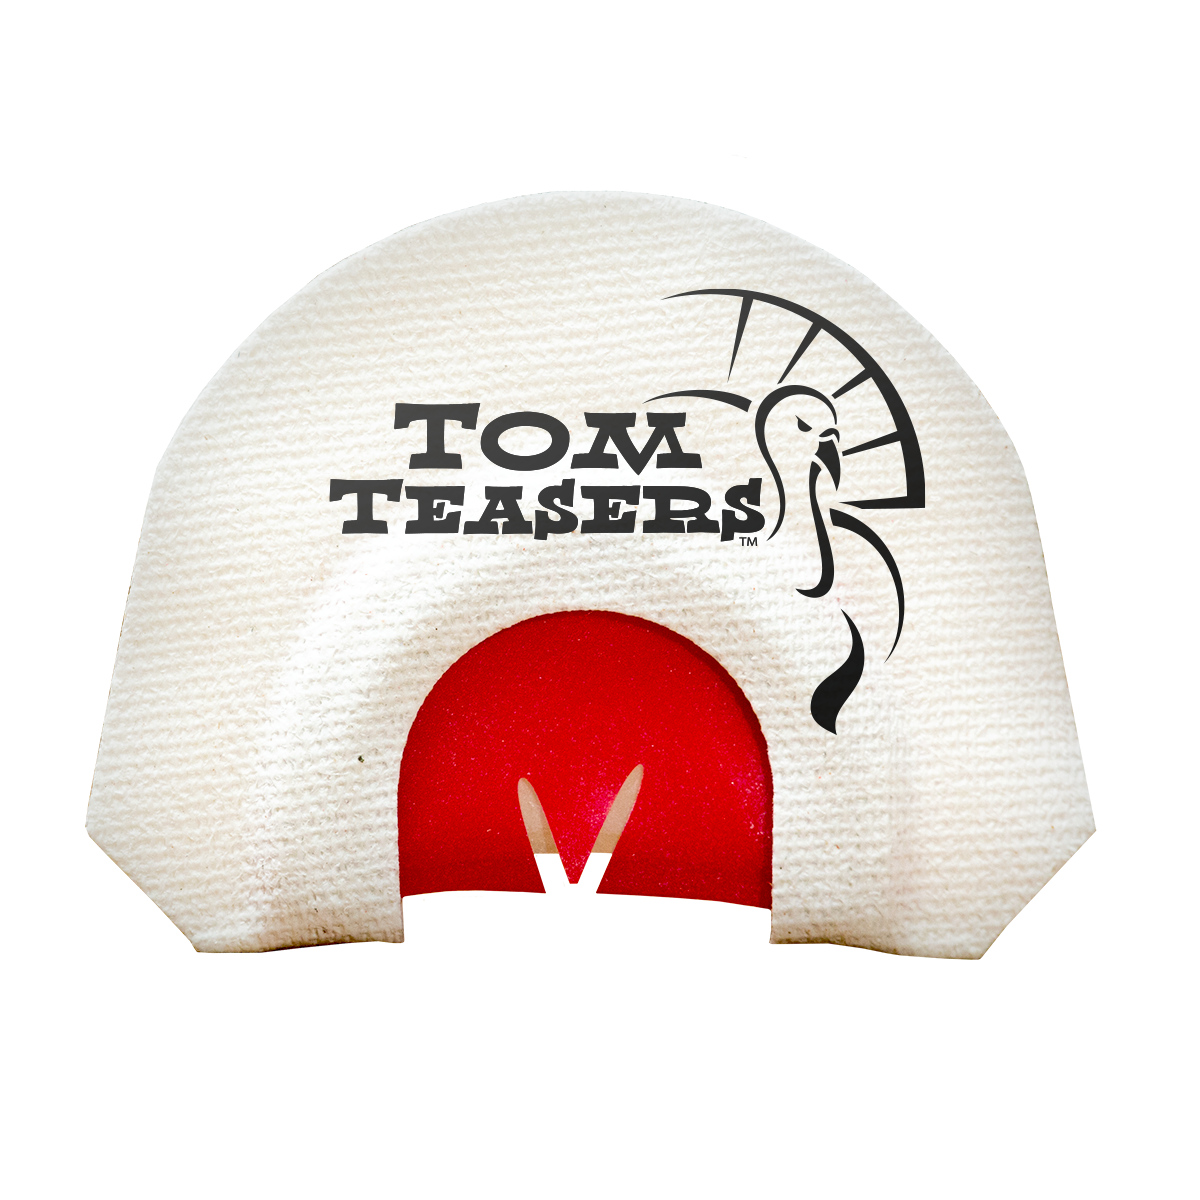 Tom-Calling: The Best Diaphragm and Friction Turkey Calls